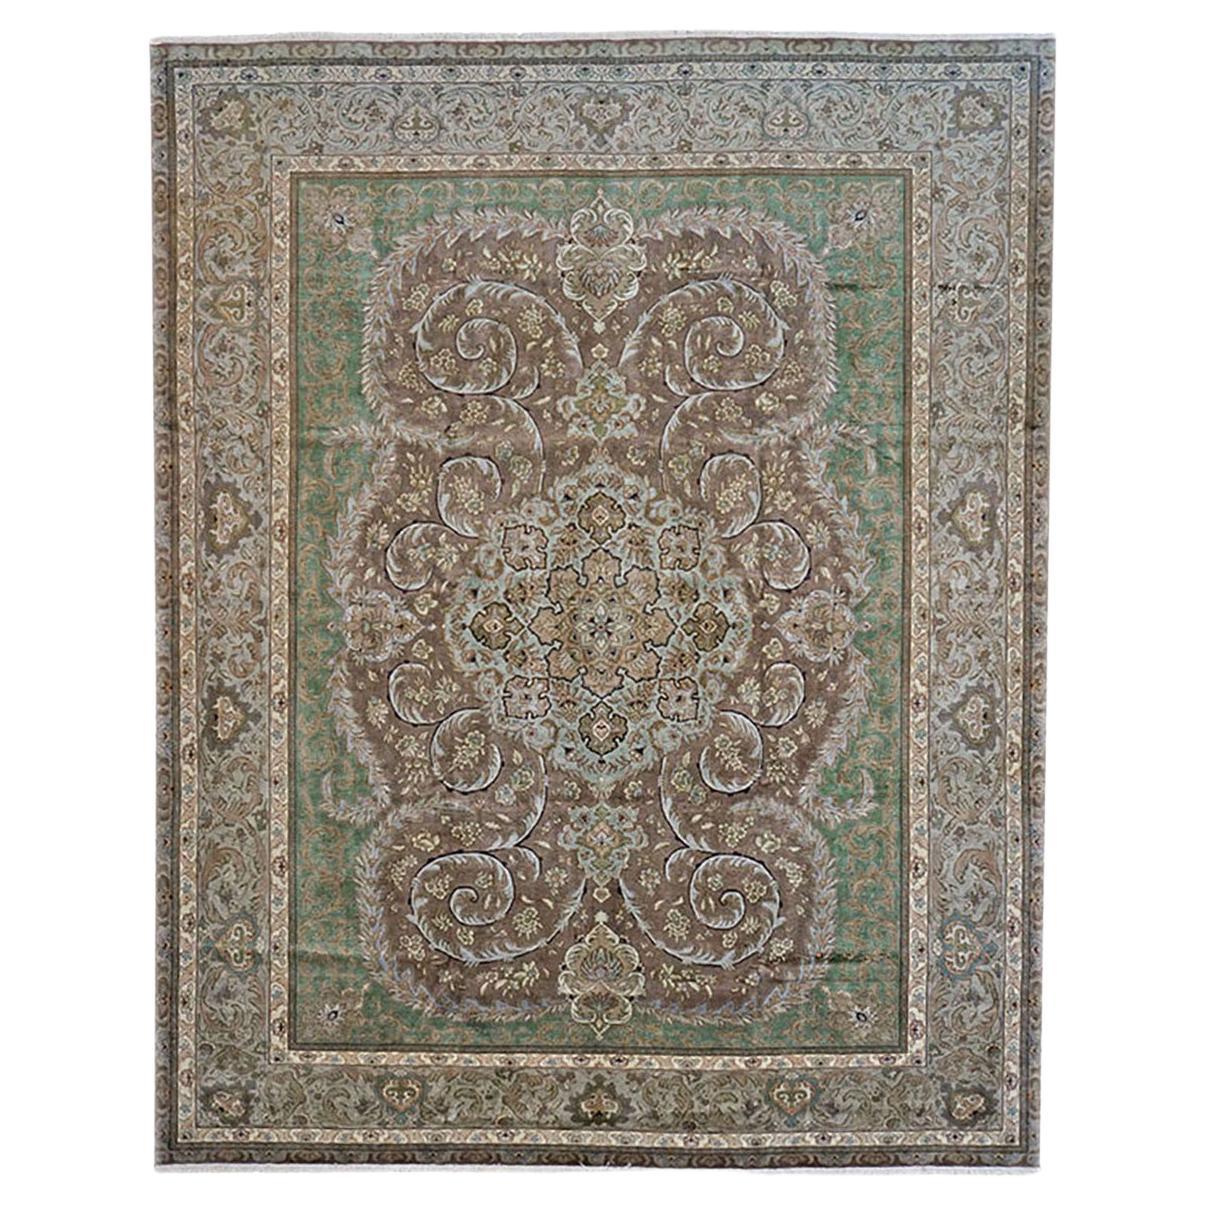 Antique Persian Tabriz 9x12 Green, Brown, & Taupe Handmade Area Rug For Sale